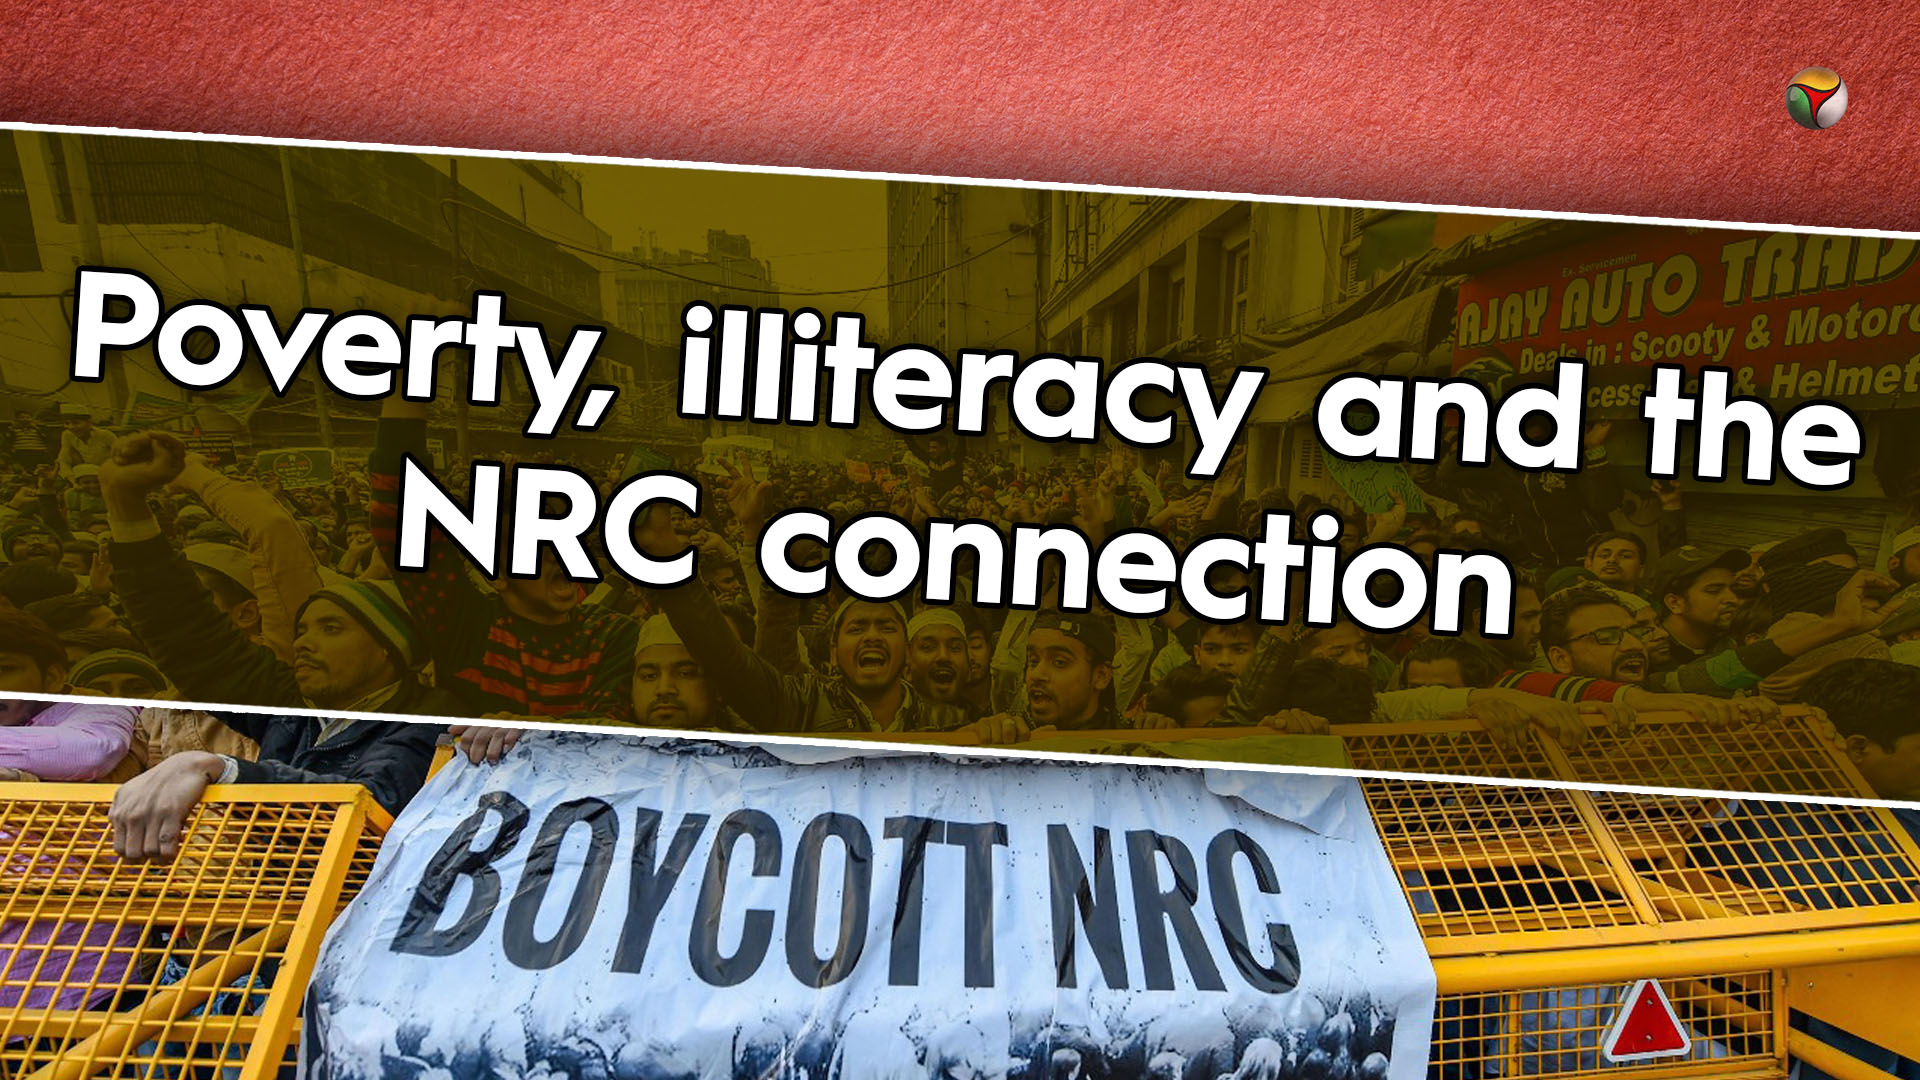 Poverty, illiteracy and the NRC connection